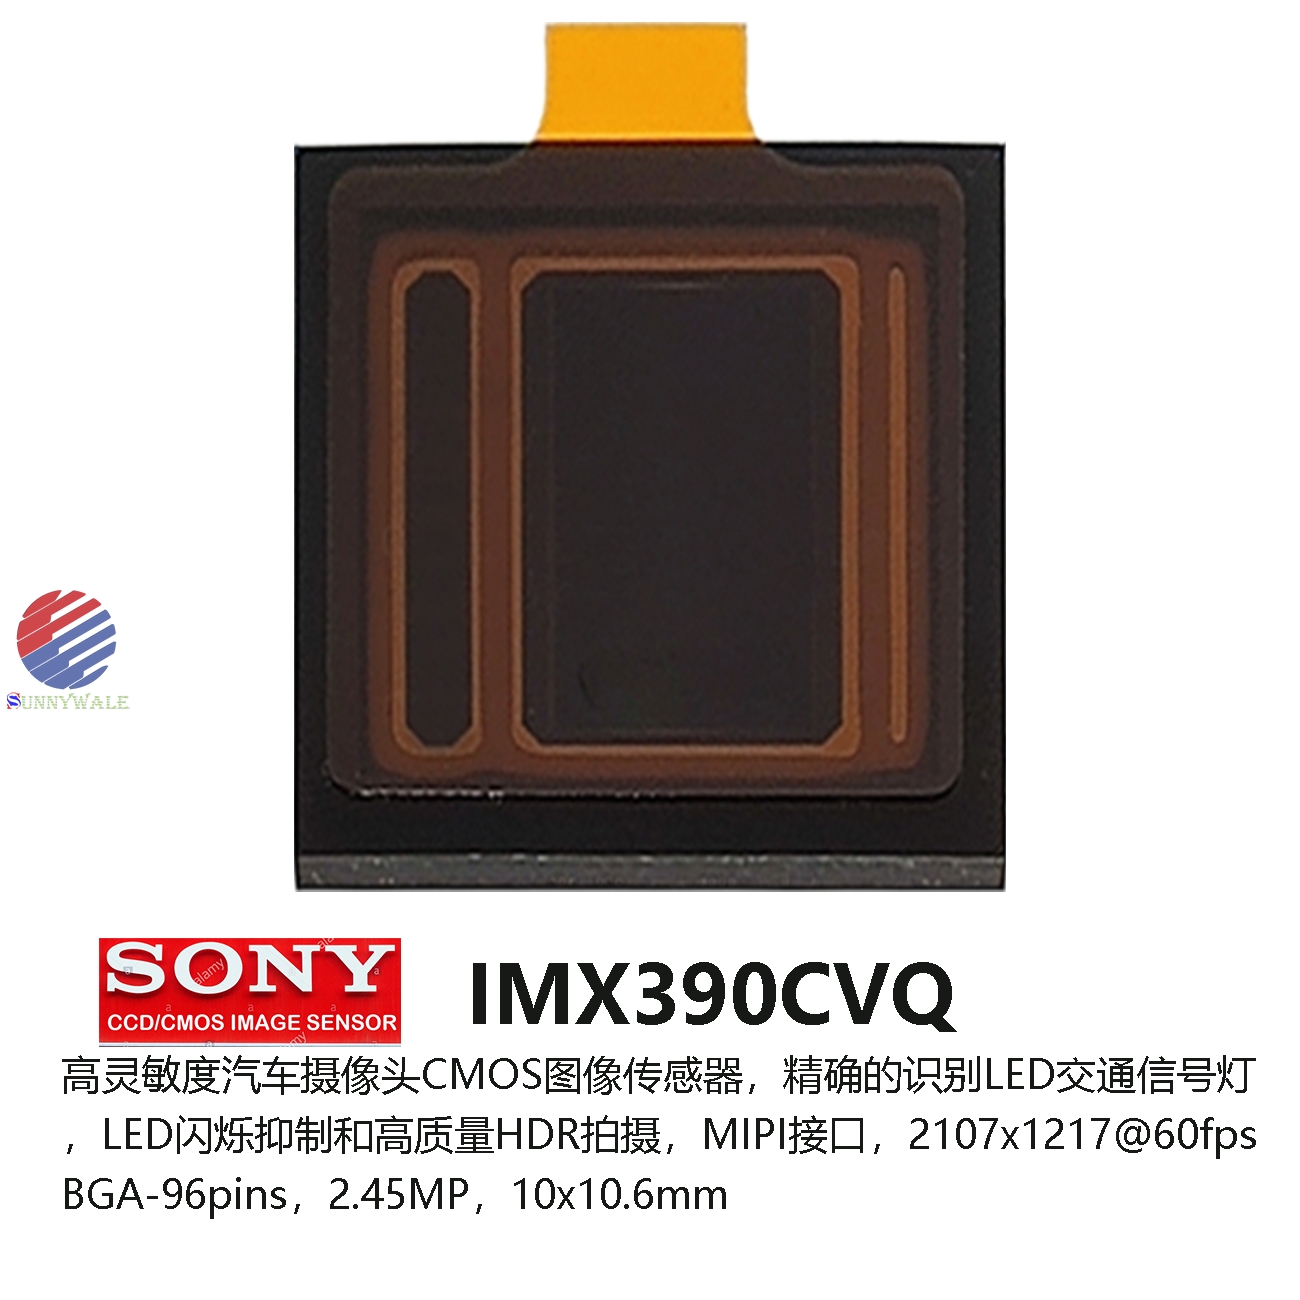 IMX390CQV, SONY 1/2.7 1080P@60fps, car assist driving camera, SONY  2.45MP image sensor, LED flicker suppression CMOS, high quality HDR shooting, accurate recognition of various traffic lights